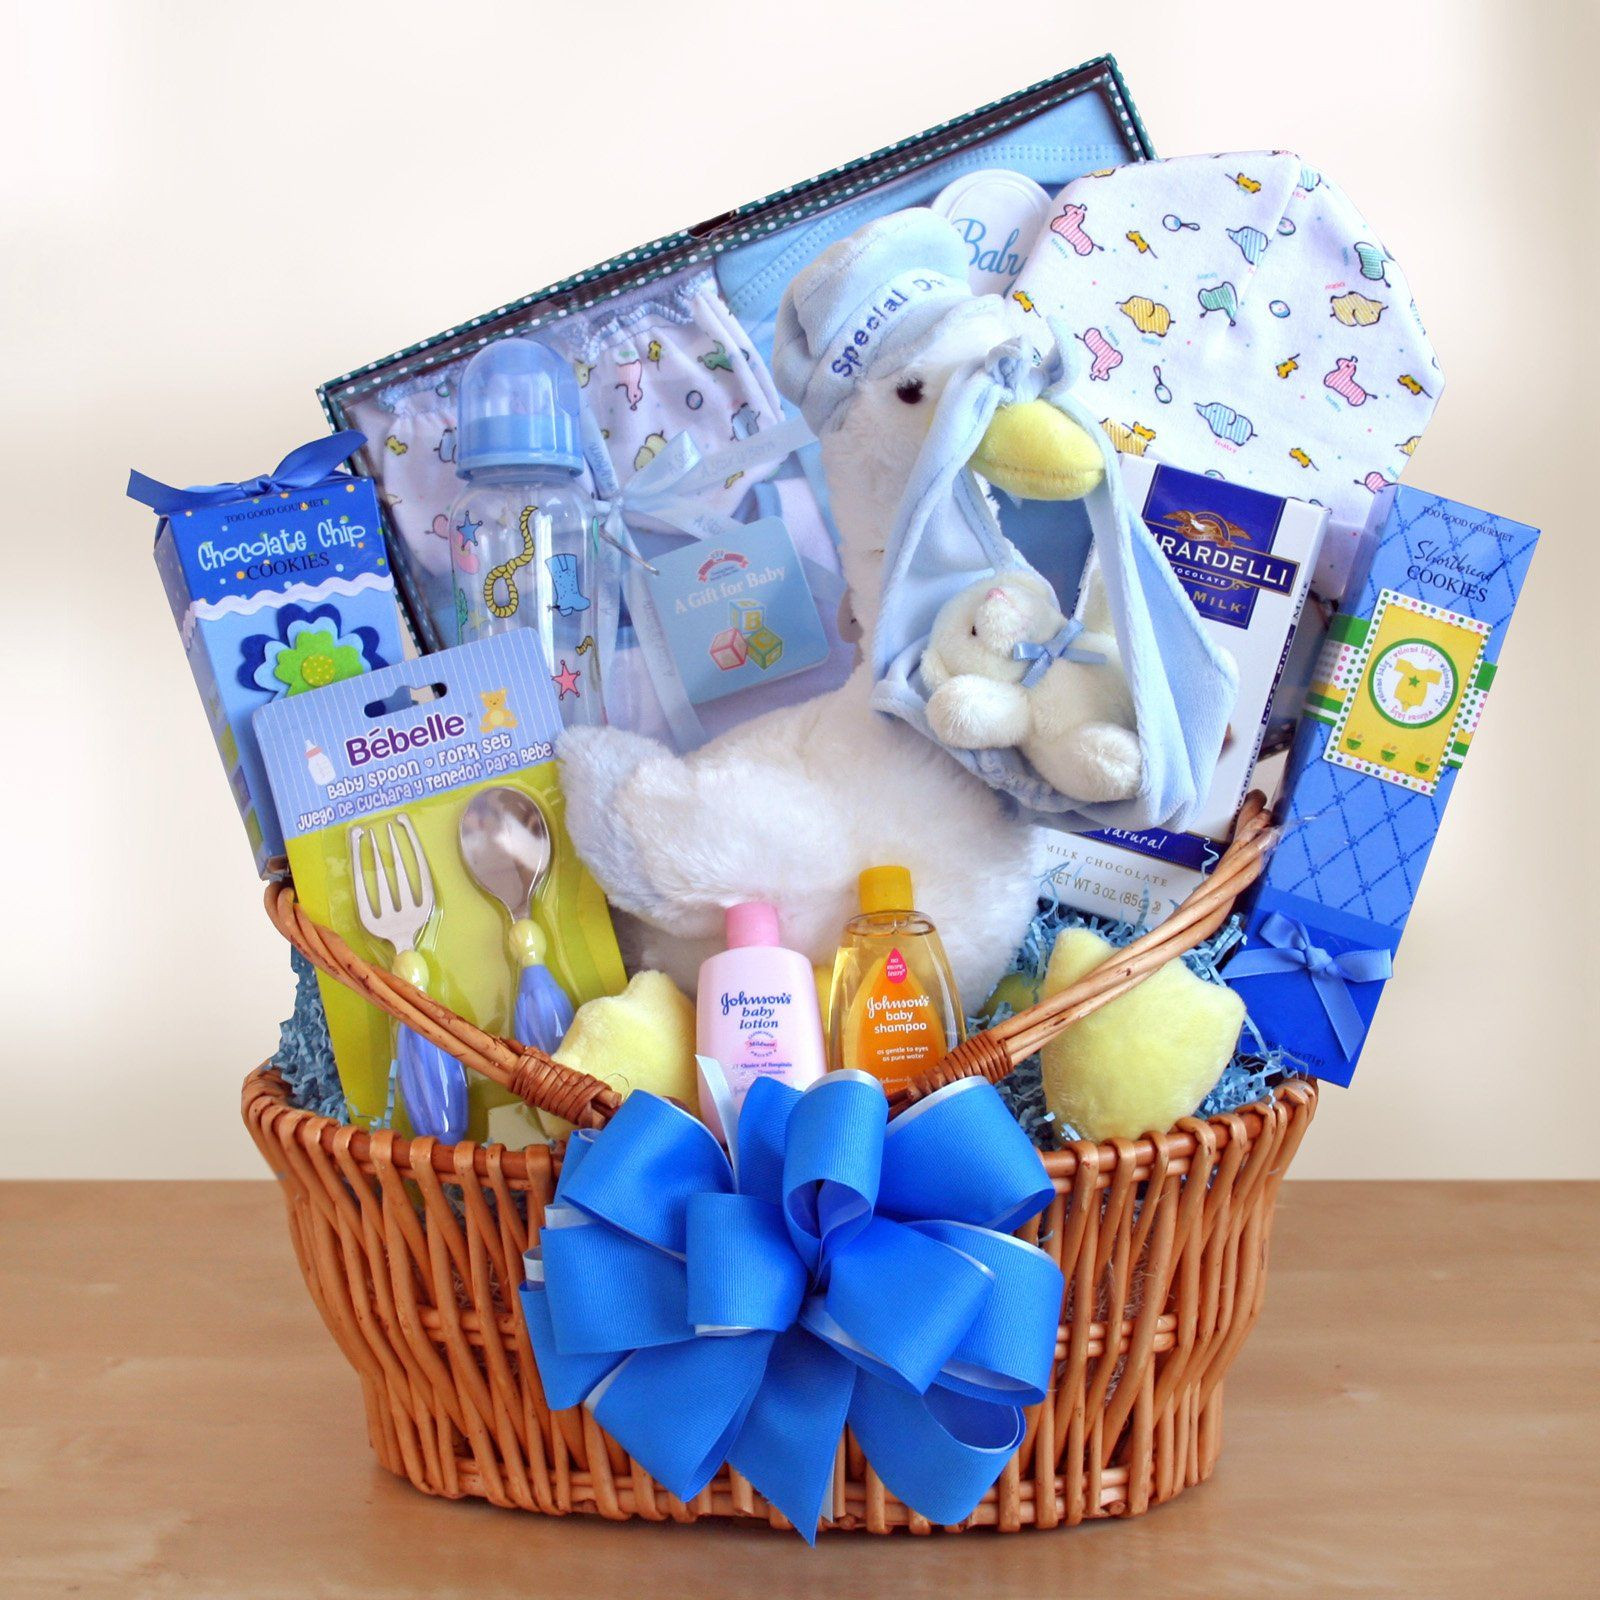 Baby Gift Ideas For Boys
 Special Stork Delivery Baby Boy Gift Basket